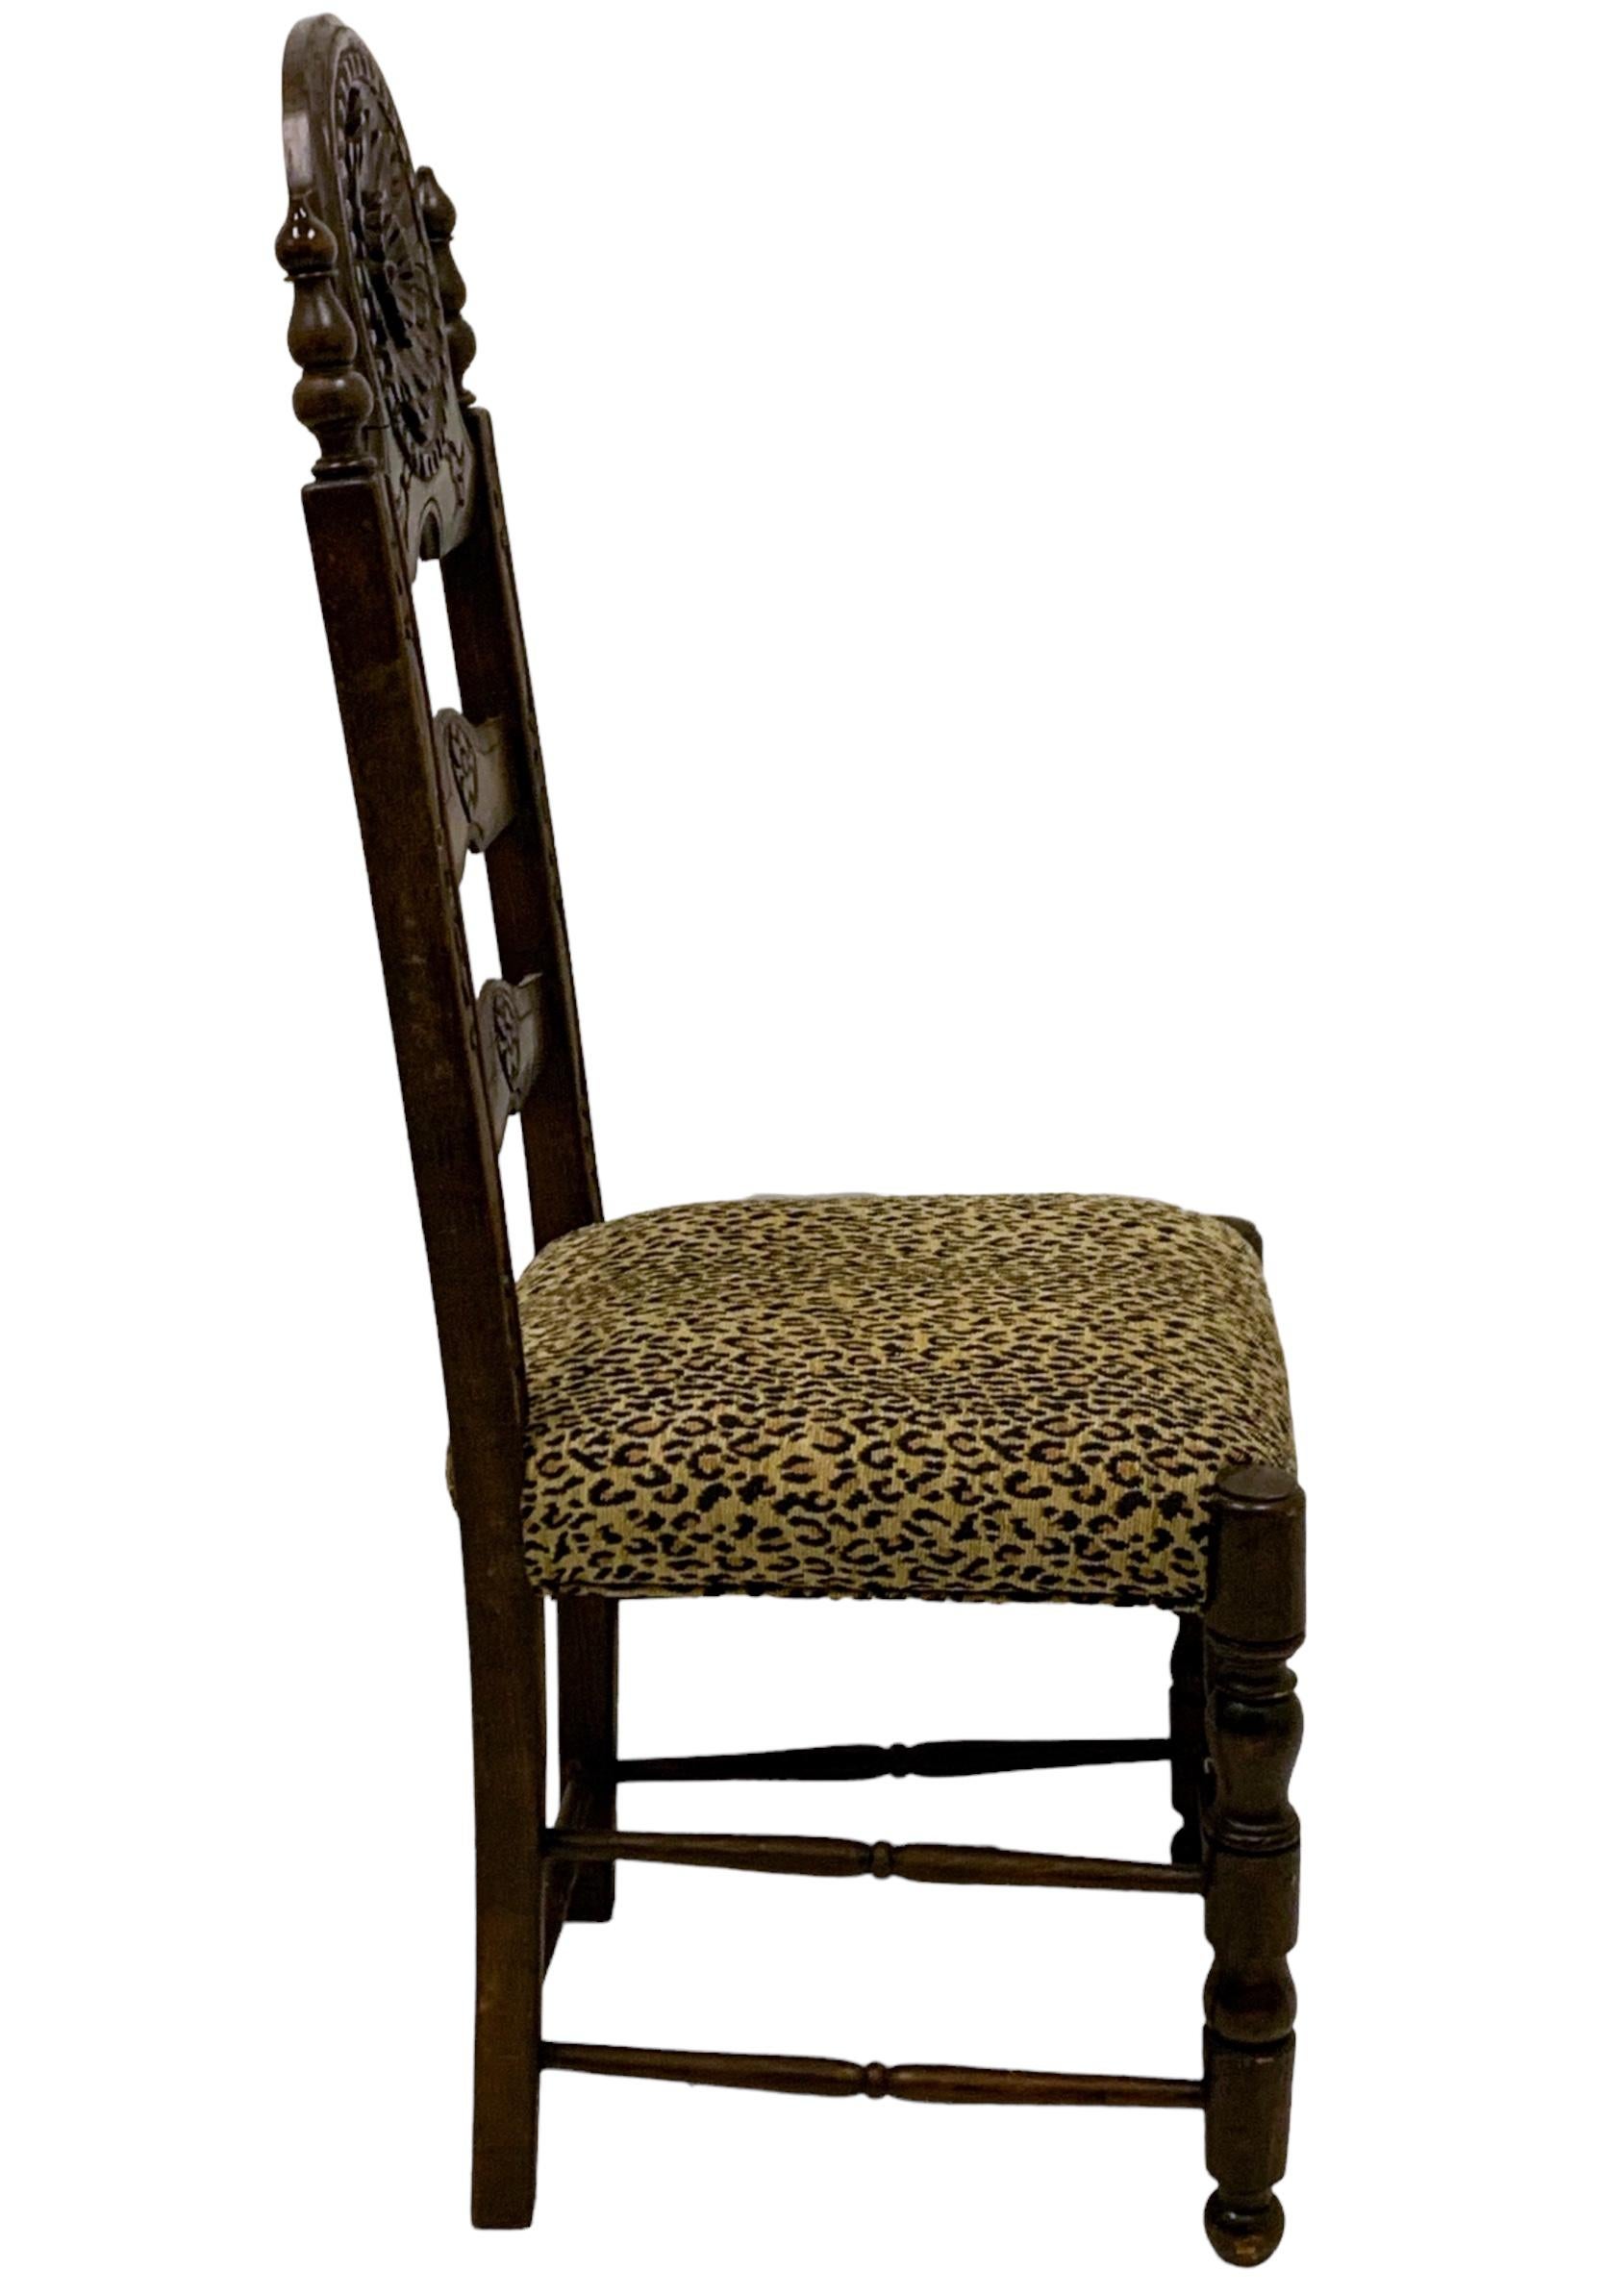 This is a pair of 19th century French carved oak side chairs. They have a vintage leopard upholstery that does not have any tears. The backs have a carved floral medallion. The ladder back frames are sound. There is a general age appropriate wear.